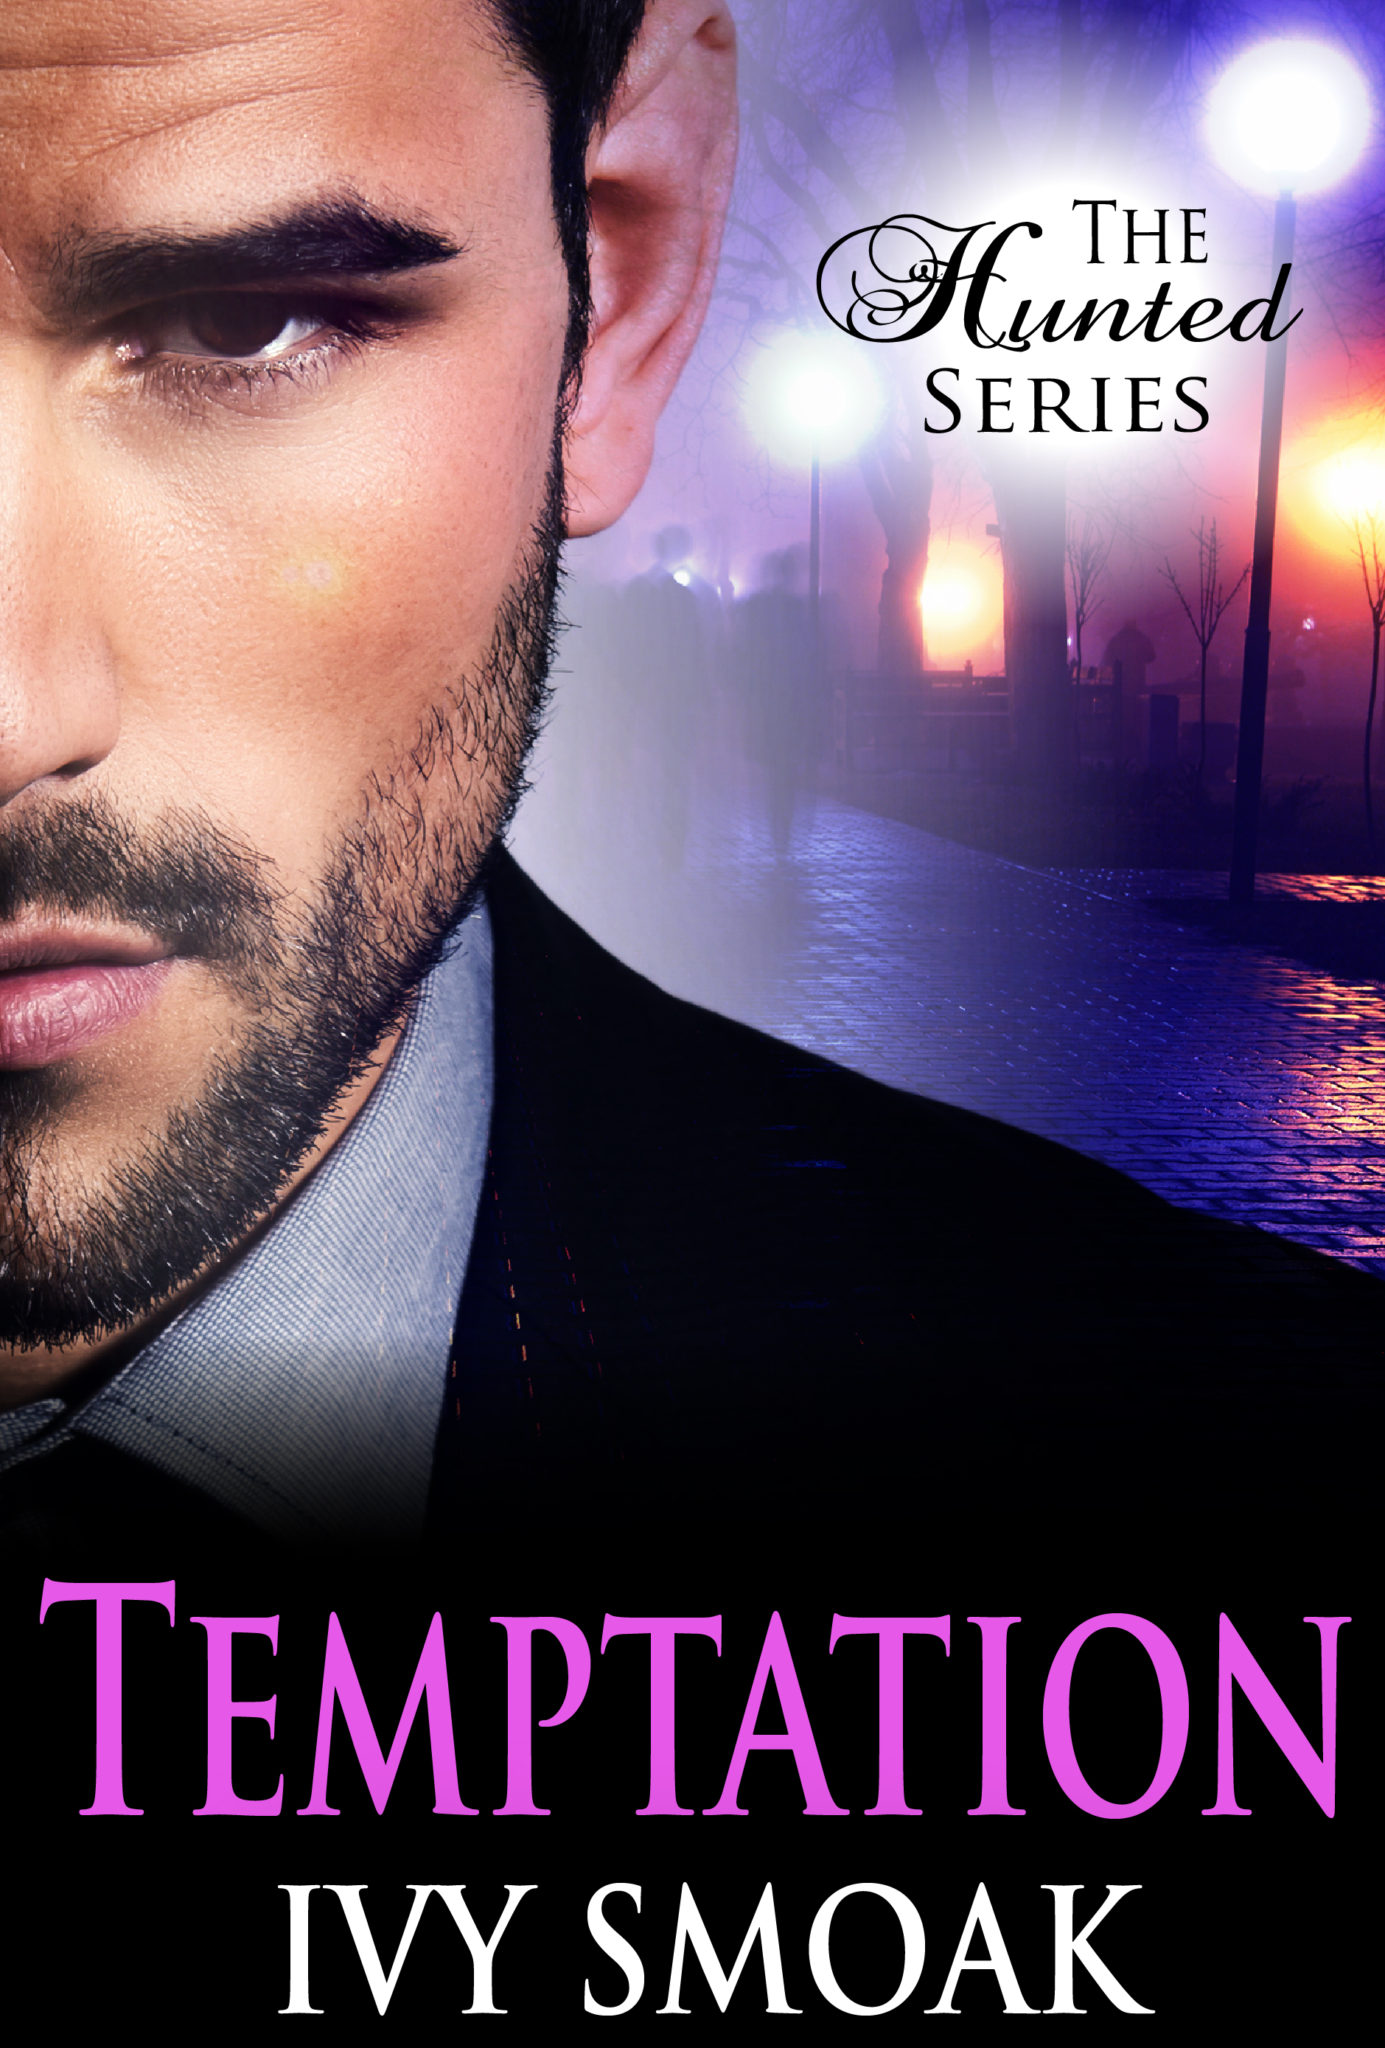 FREE: Temptation Part 1 (The Hunted Series Part 1) by Ivy Smoak